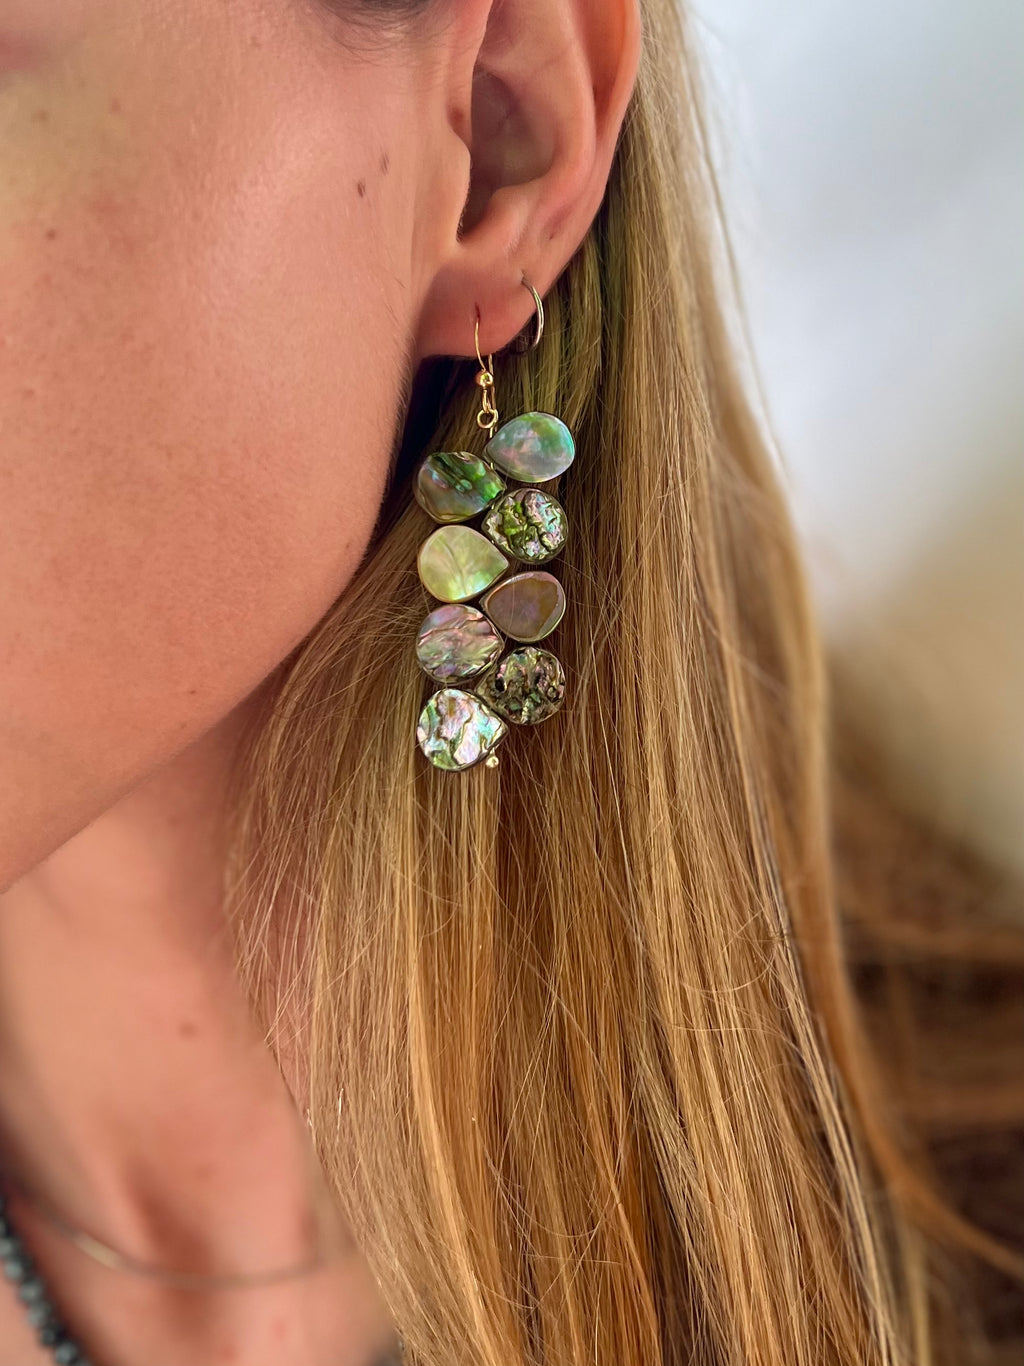 Stacked abalone earrings which flutter with movement as you wear them.  Materials Matter: farm raised abalone beads on gold fill ear wires.  Made by Badass Women for Badass People: Designed in California by Carrie Marill and made by hand in her SoCal studio.